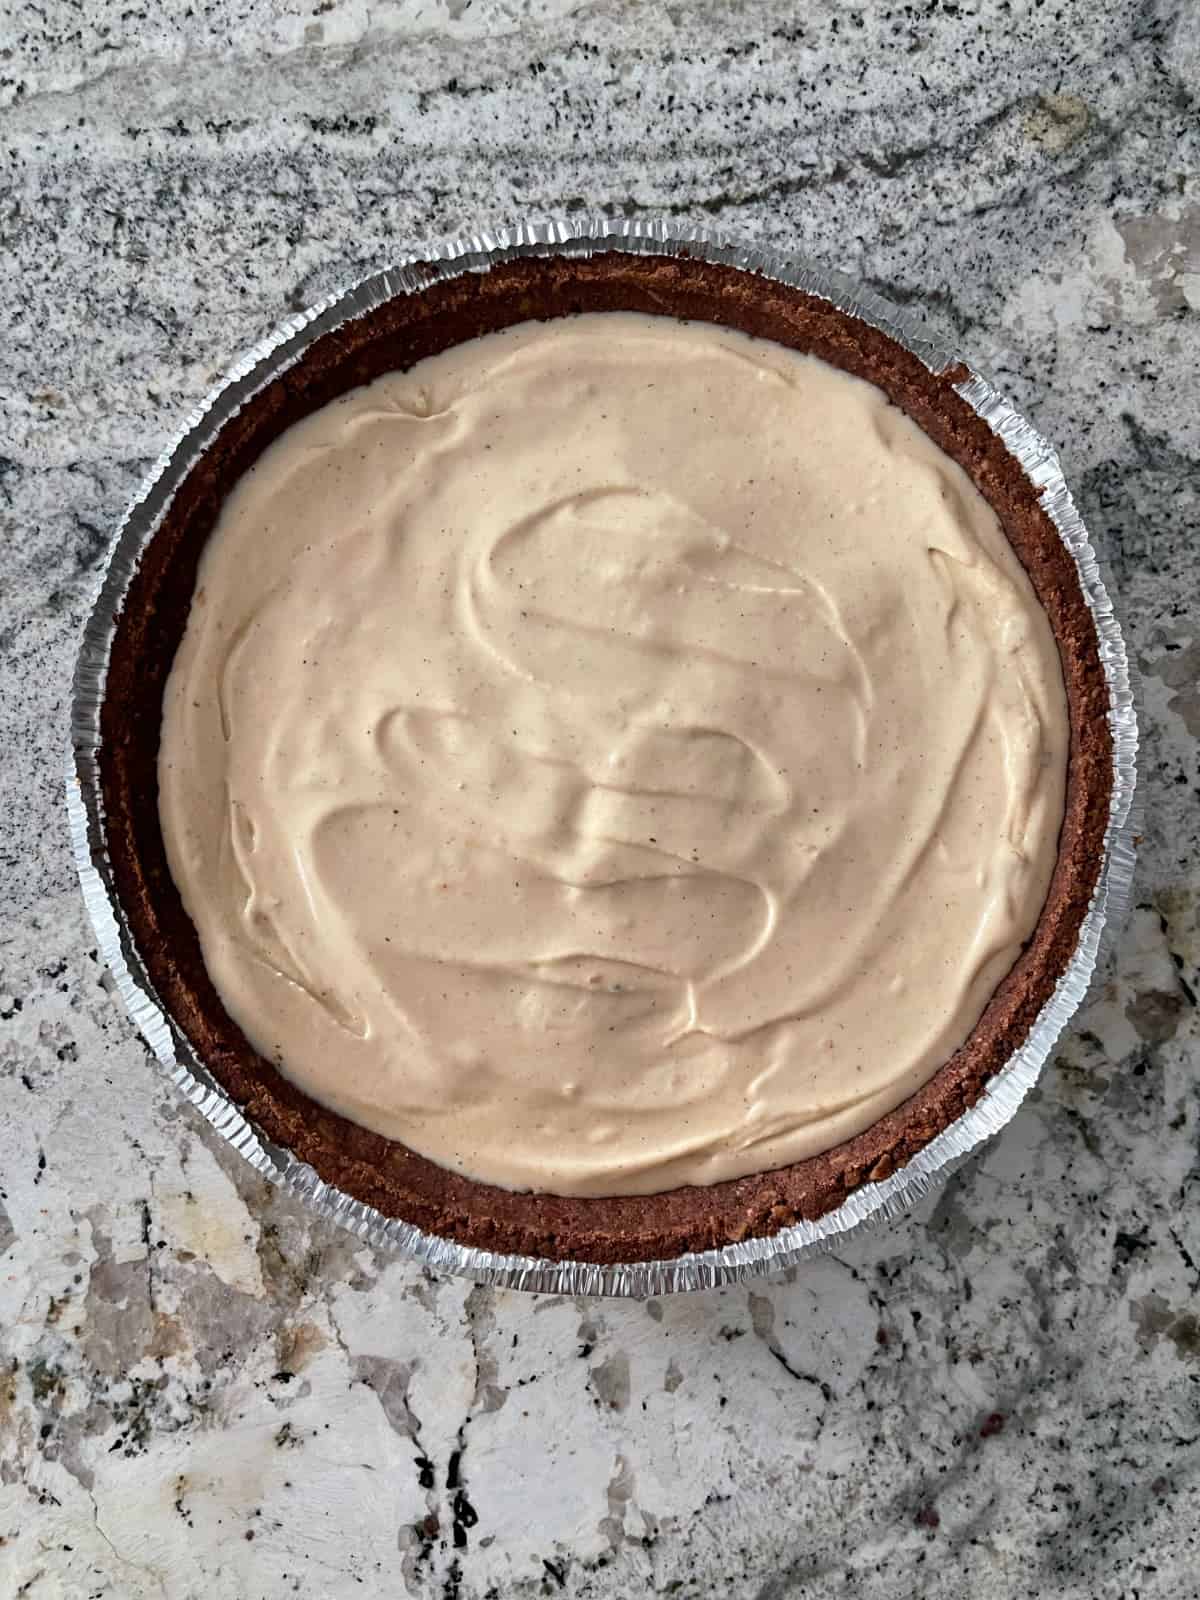 Chocolate pie crust filled with peanut butter ice cream on granite.